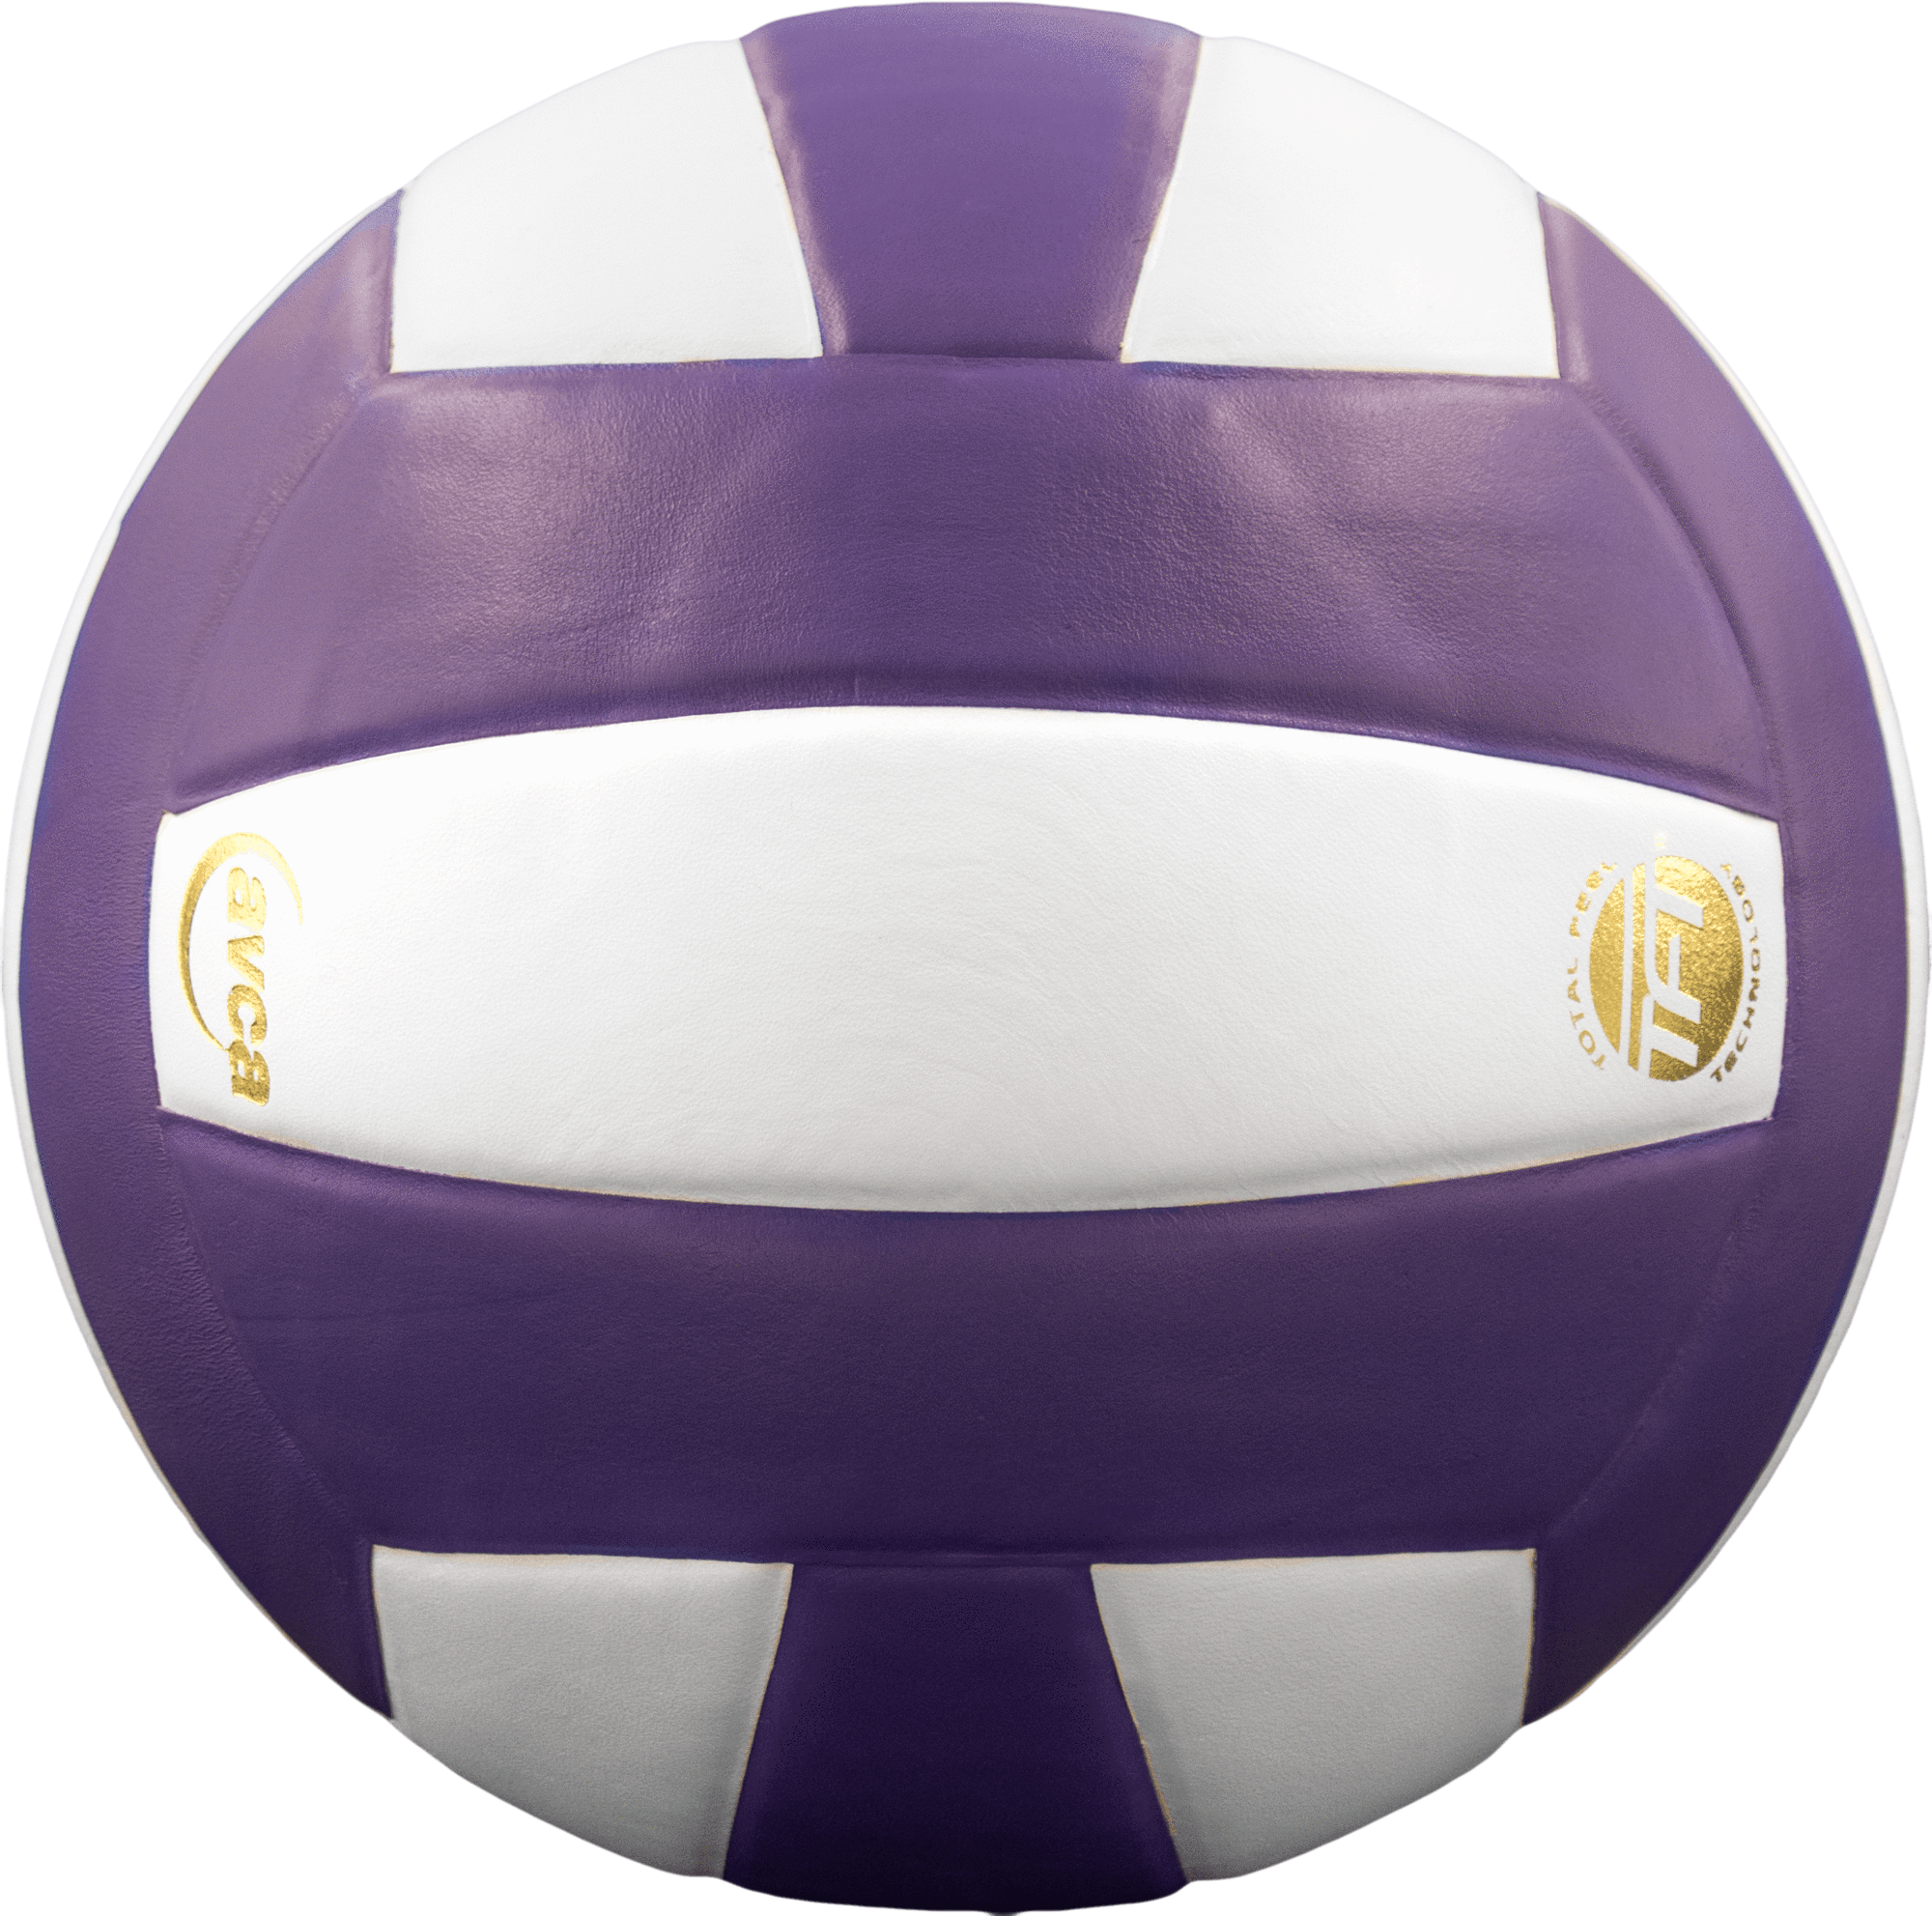 Baden - Leather Perfection Sports Volleyball